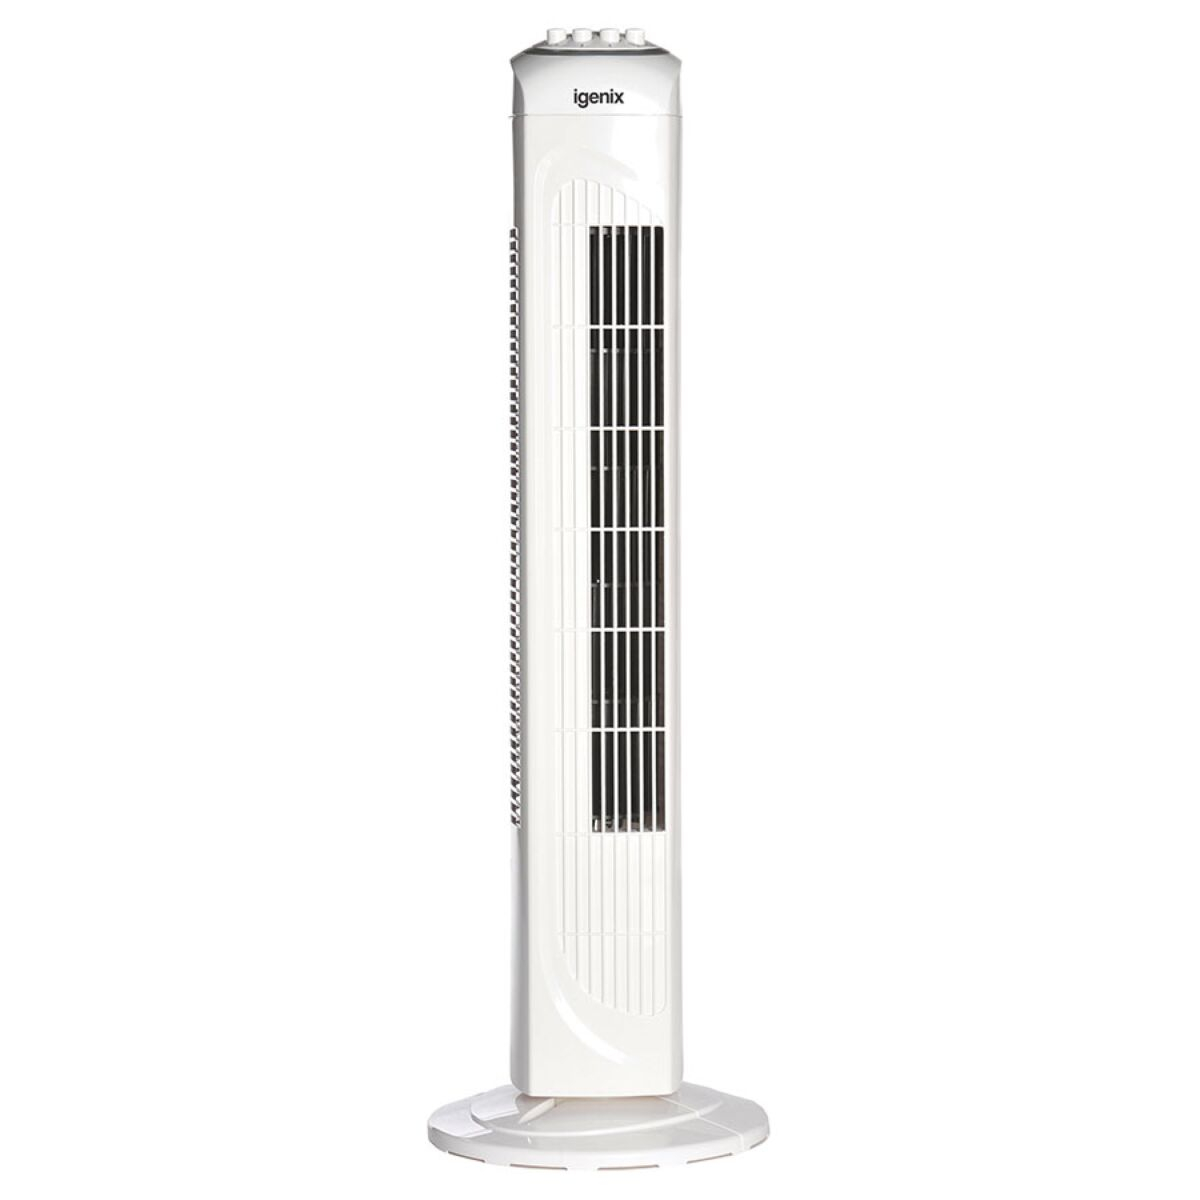 Igenix Df0030 30 Inch Tower Fan With 2hr Timer White intended for size 1200 X 1200